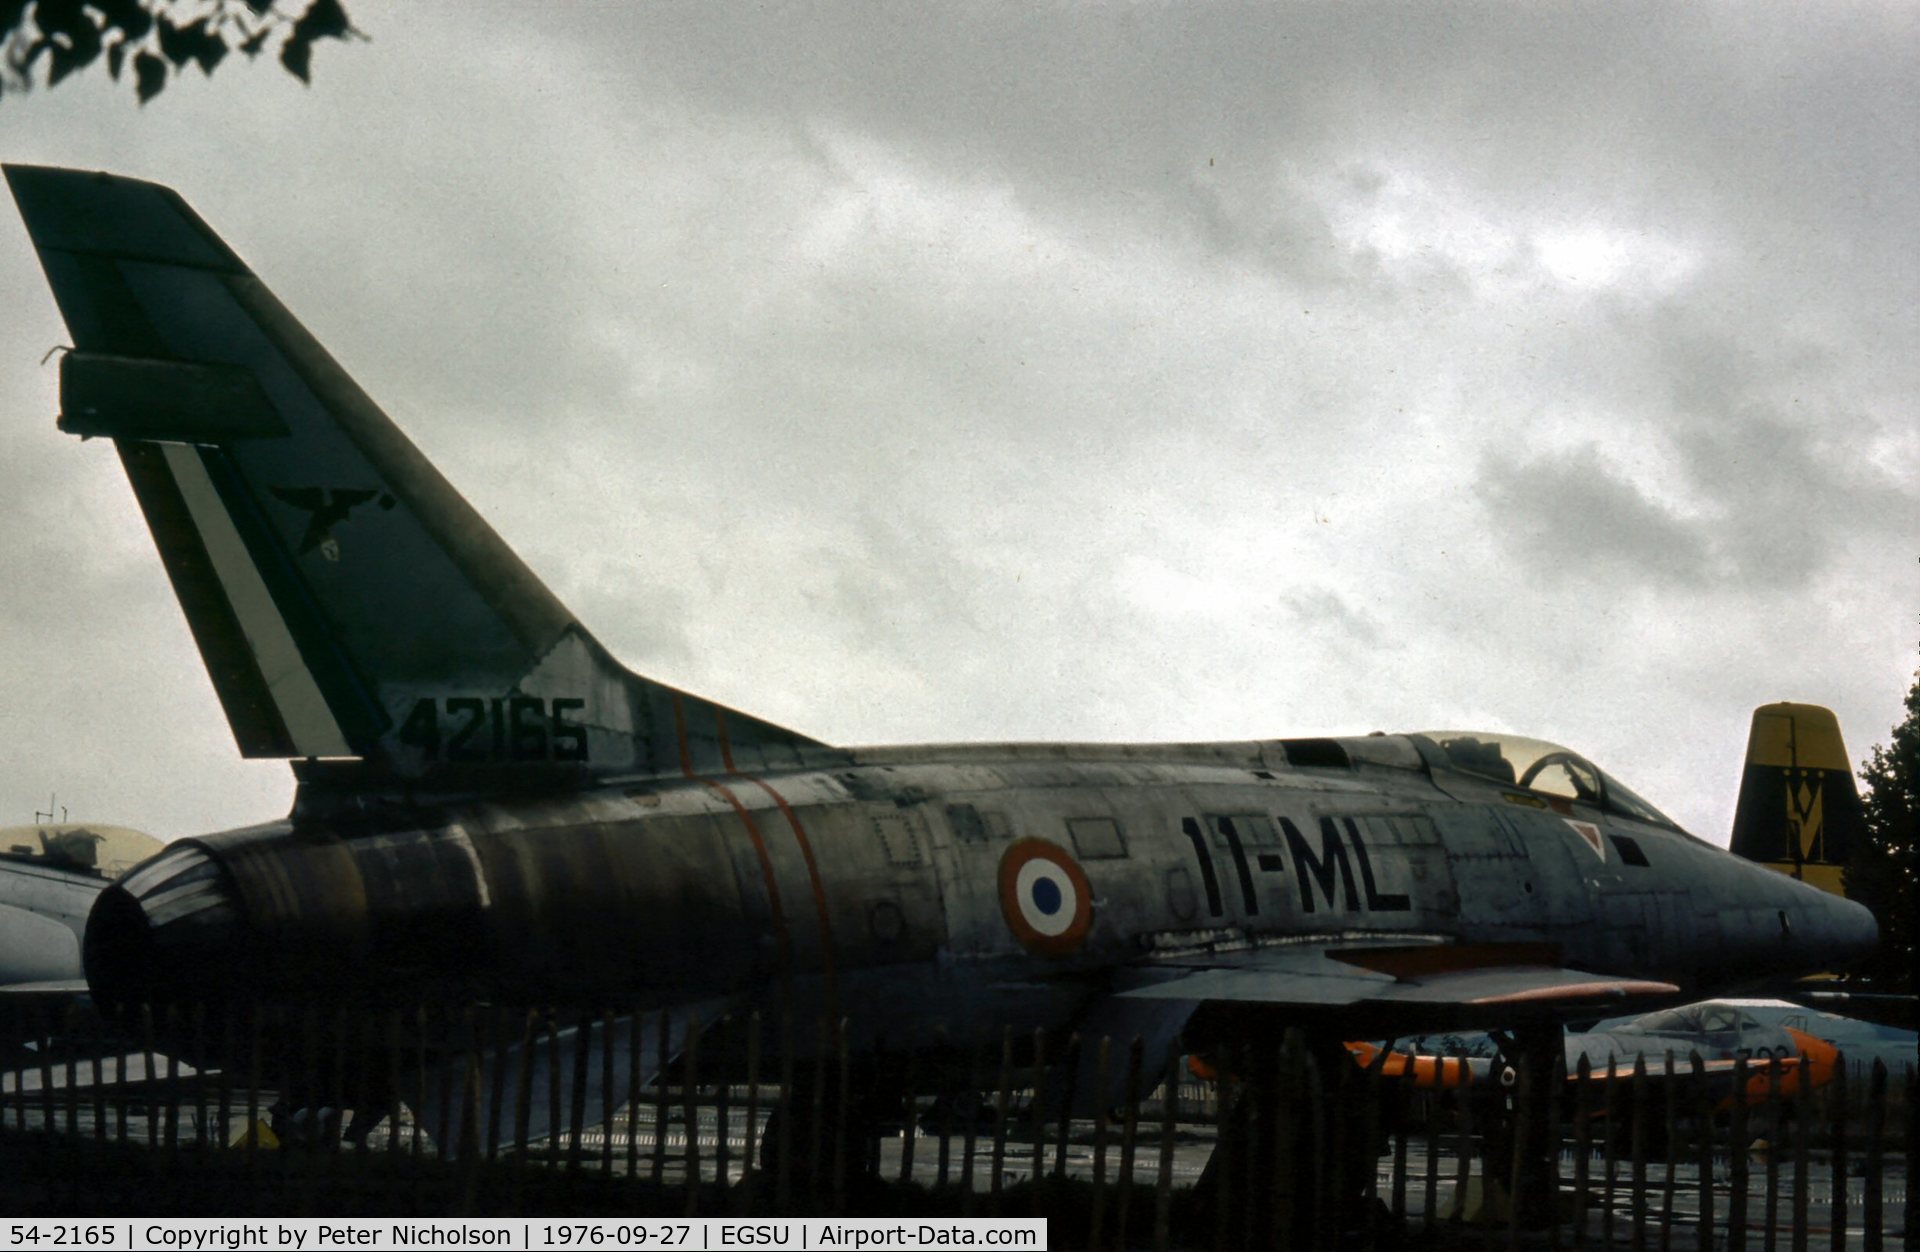 54-2165, North American F-100D Super Sabre C/N 223-45, F-100D Super Sabre ex-French Air Force EC.70 at the Imperial War Museum at Duxford in the Summer of 1976.